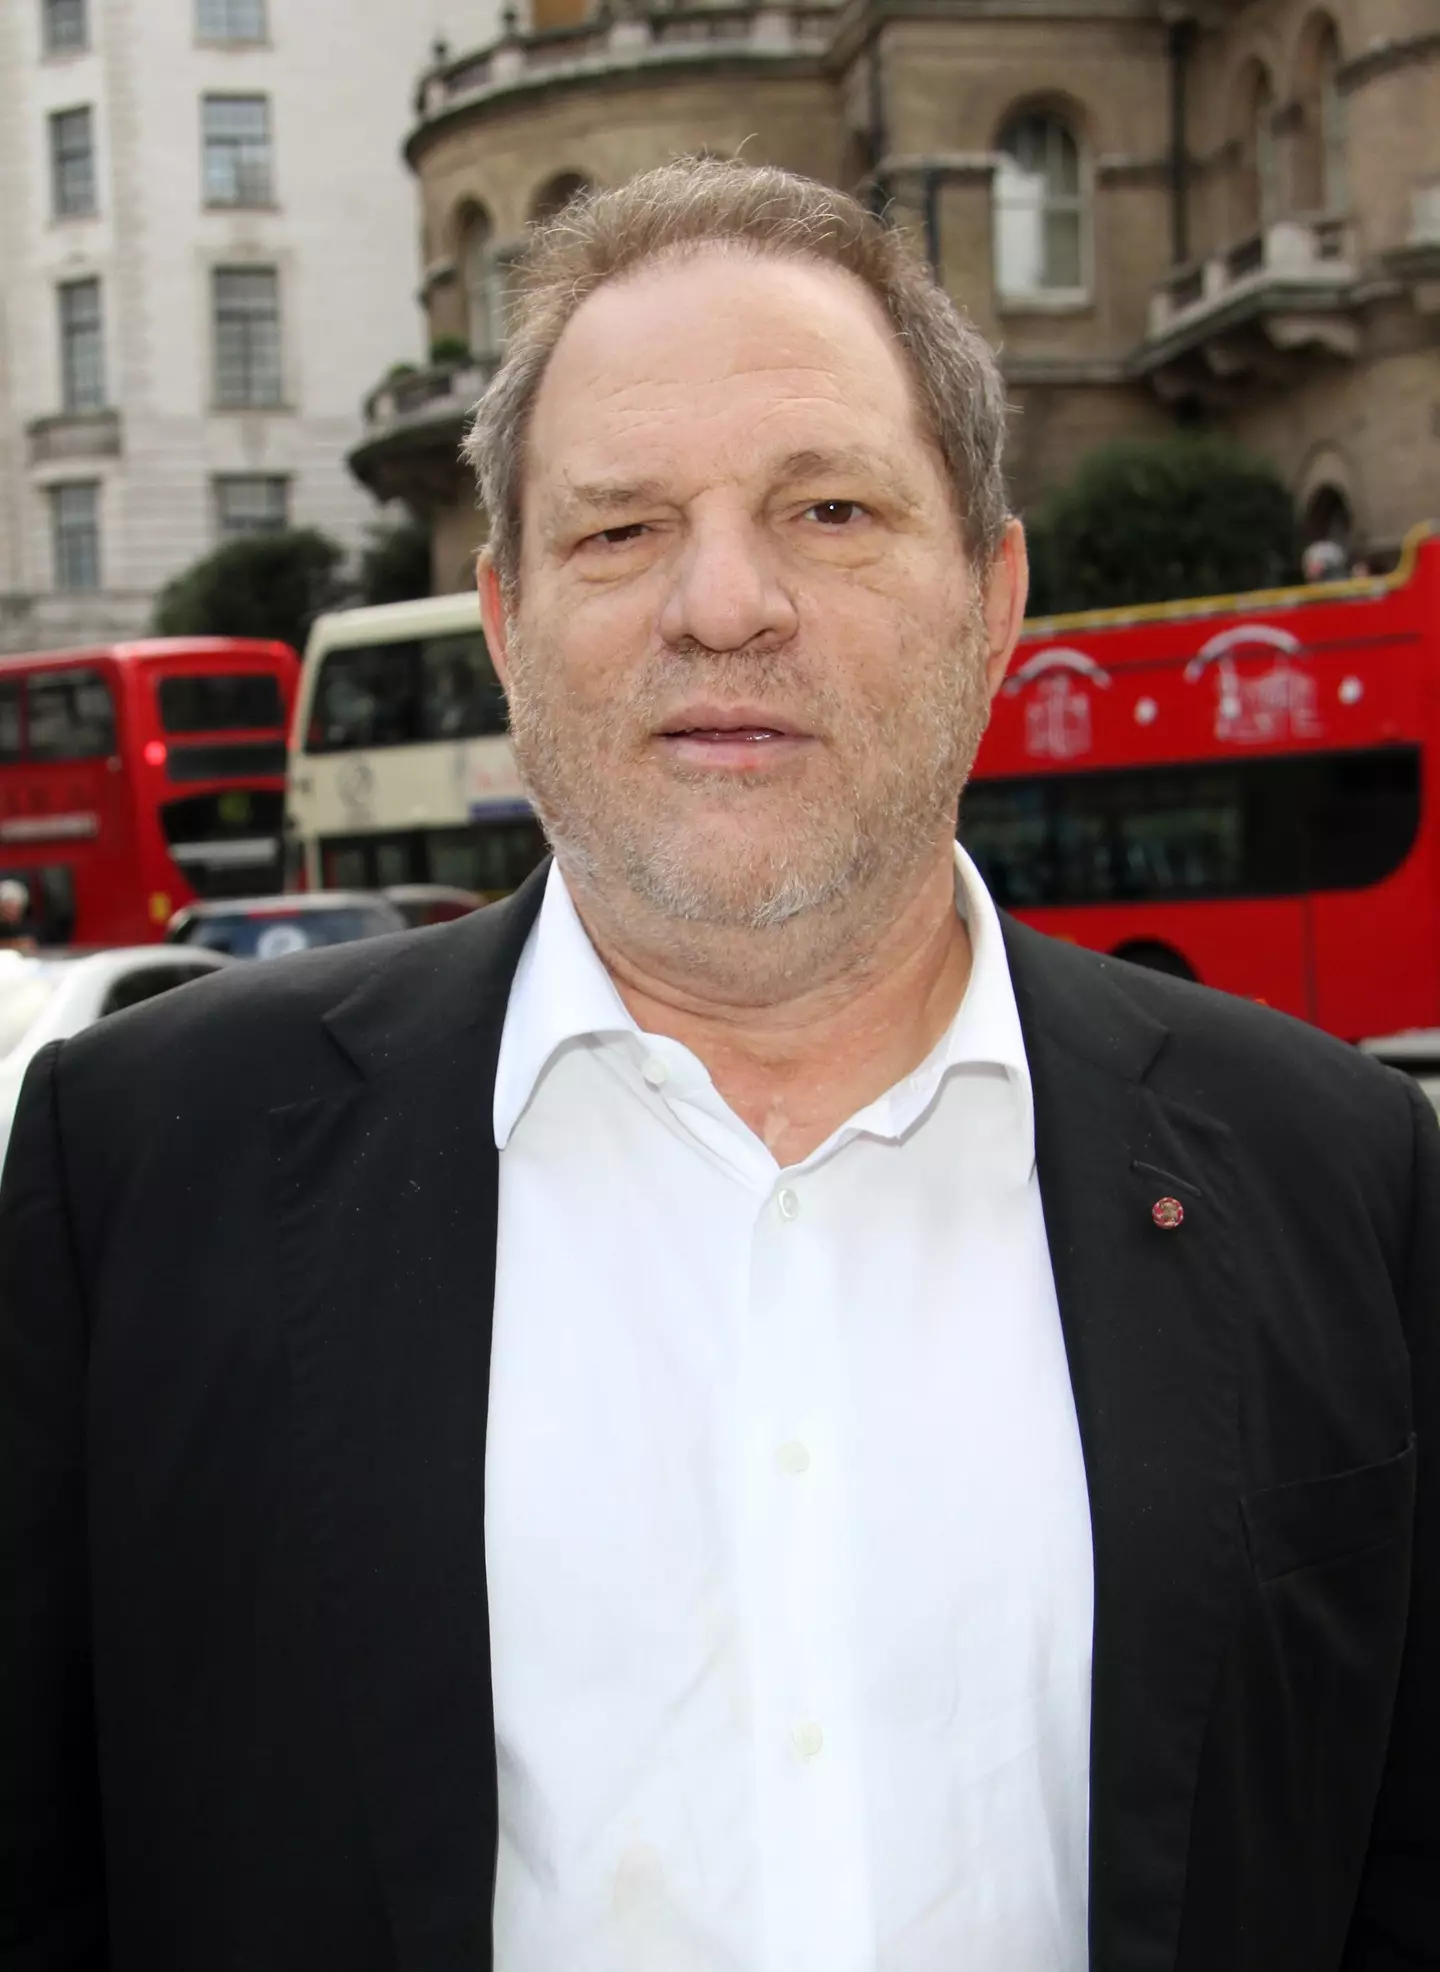 Harvey Weinstein is accused of rape and sexual assault.